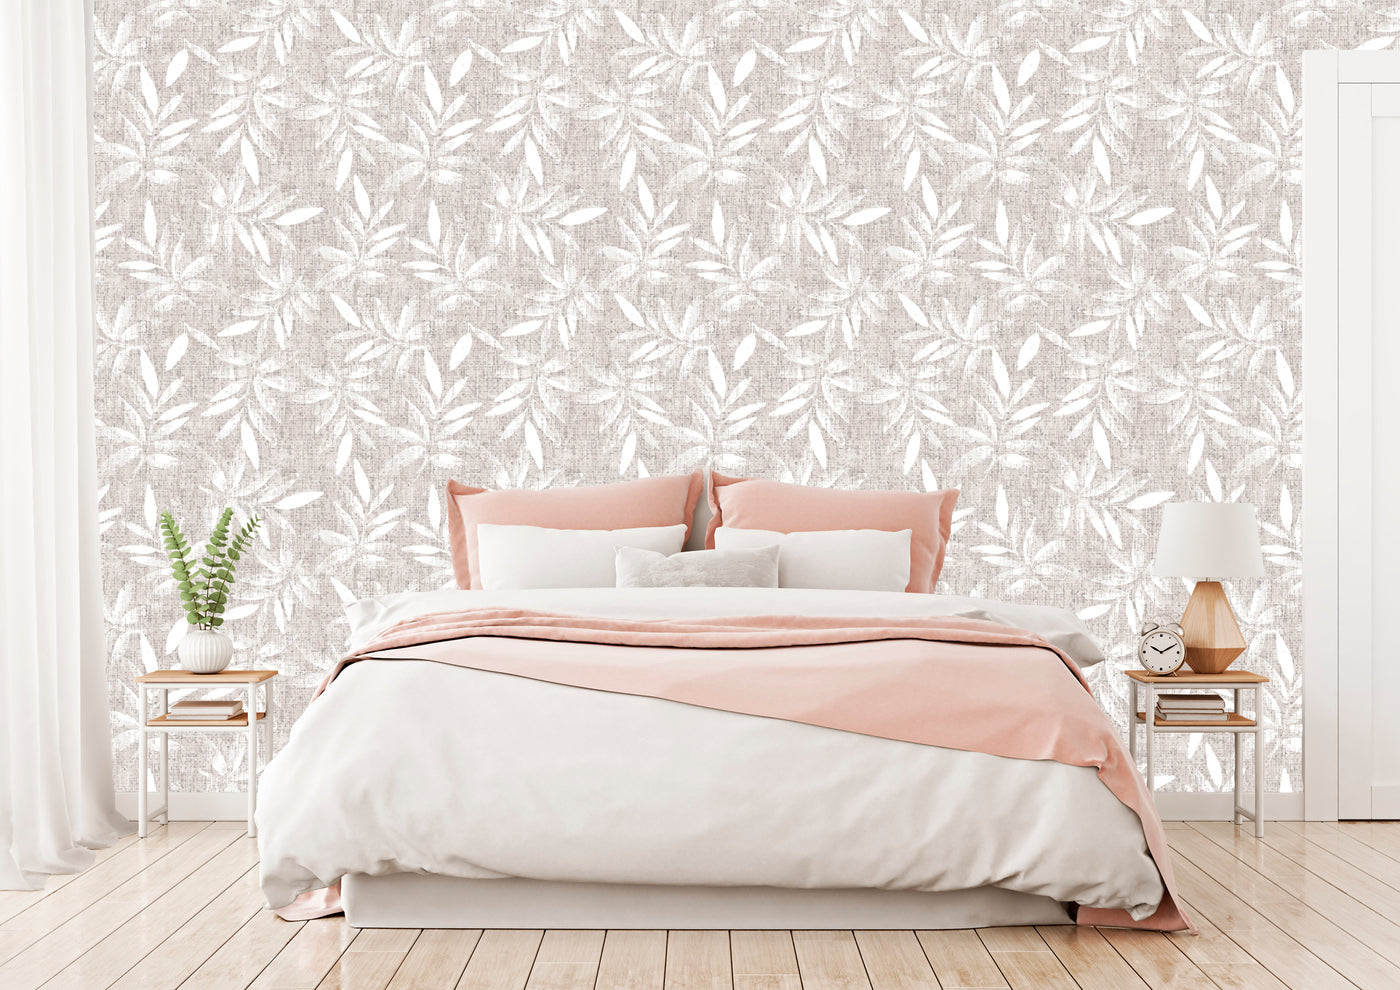 Wallpaper - Linen Texture with White Leaves